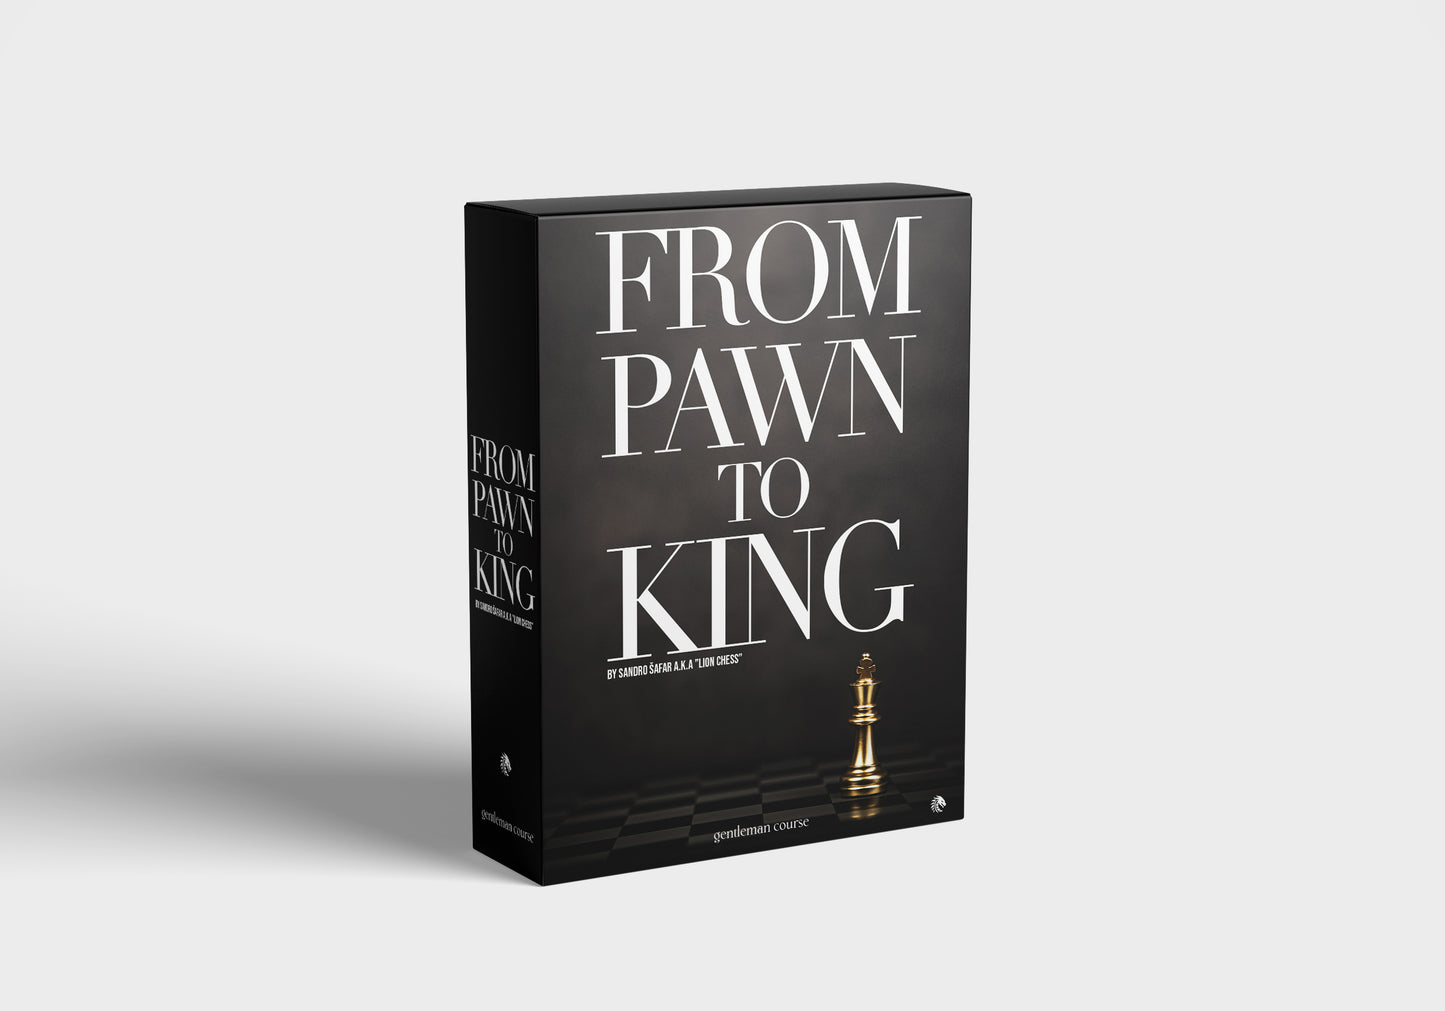 FROM PAWN TO KING